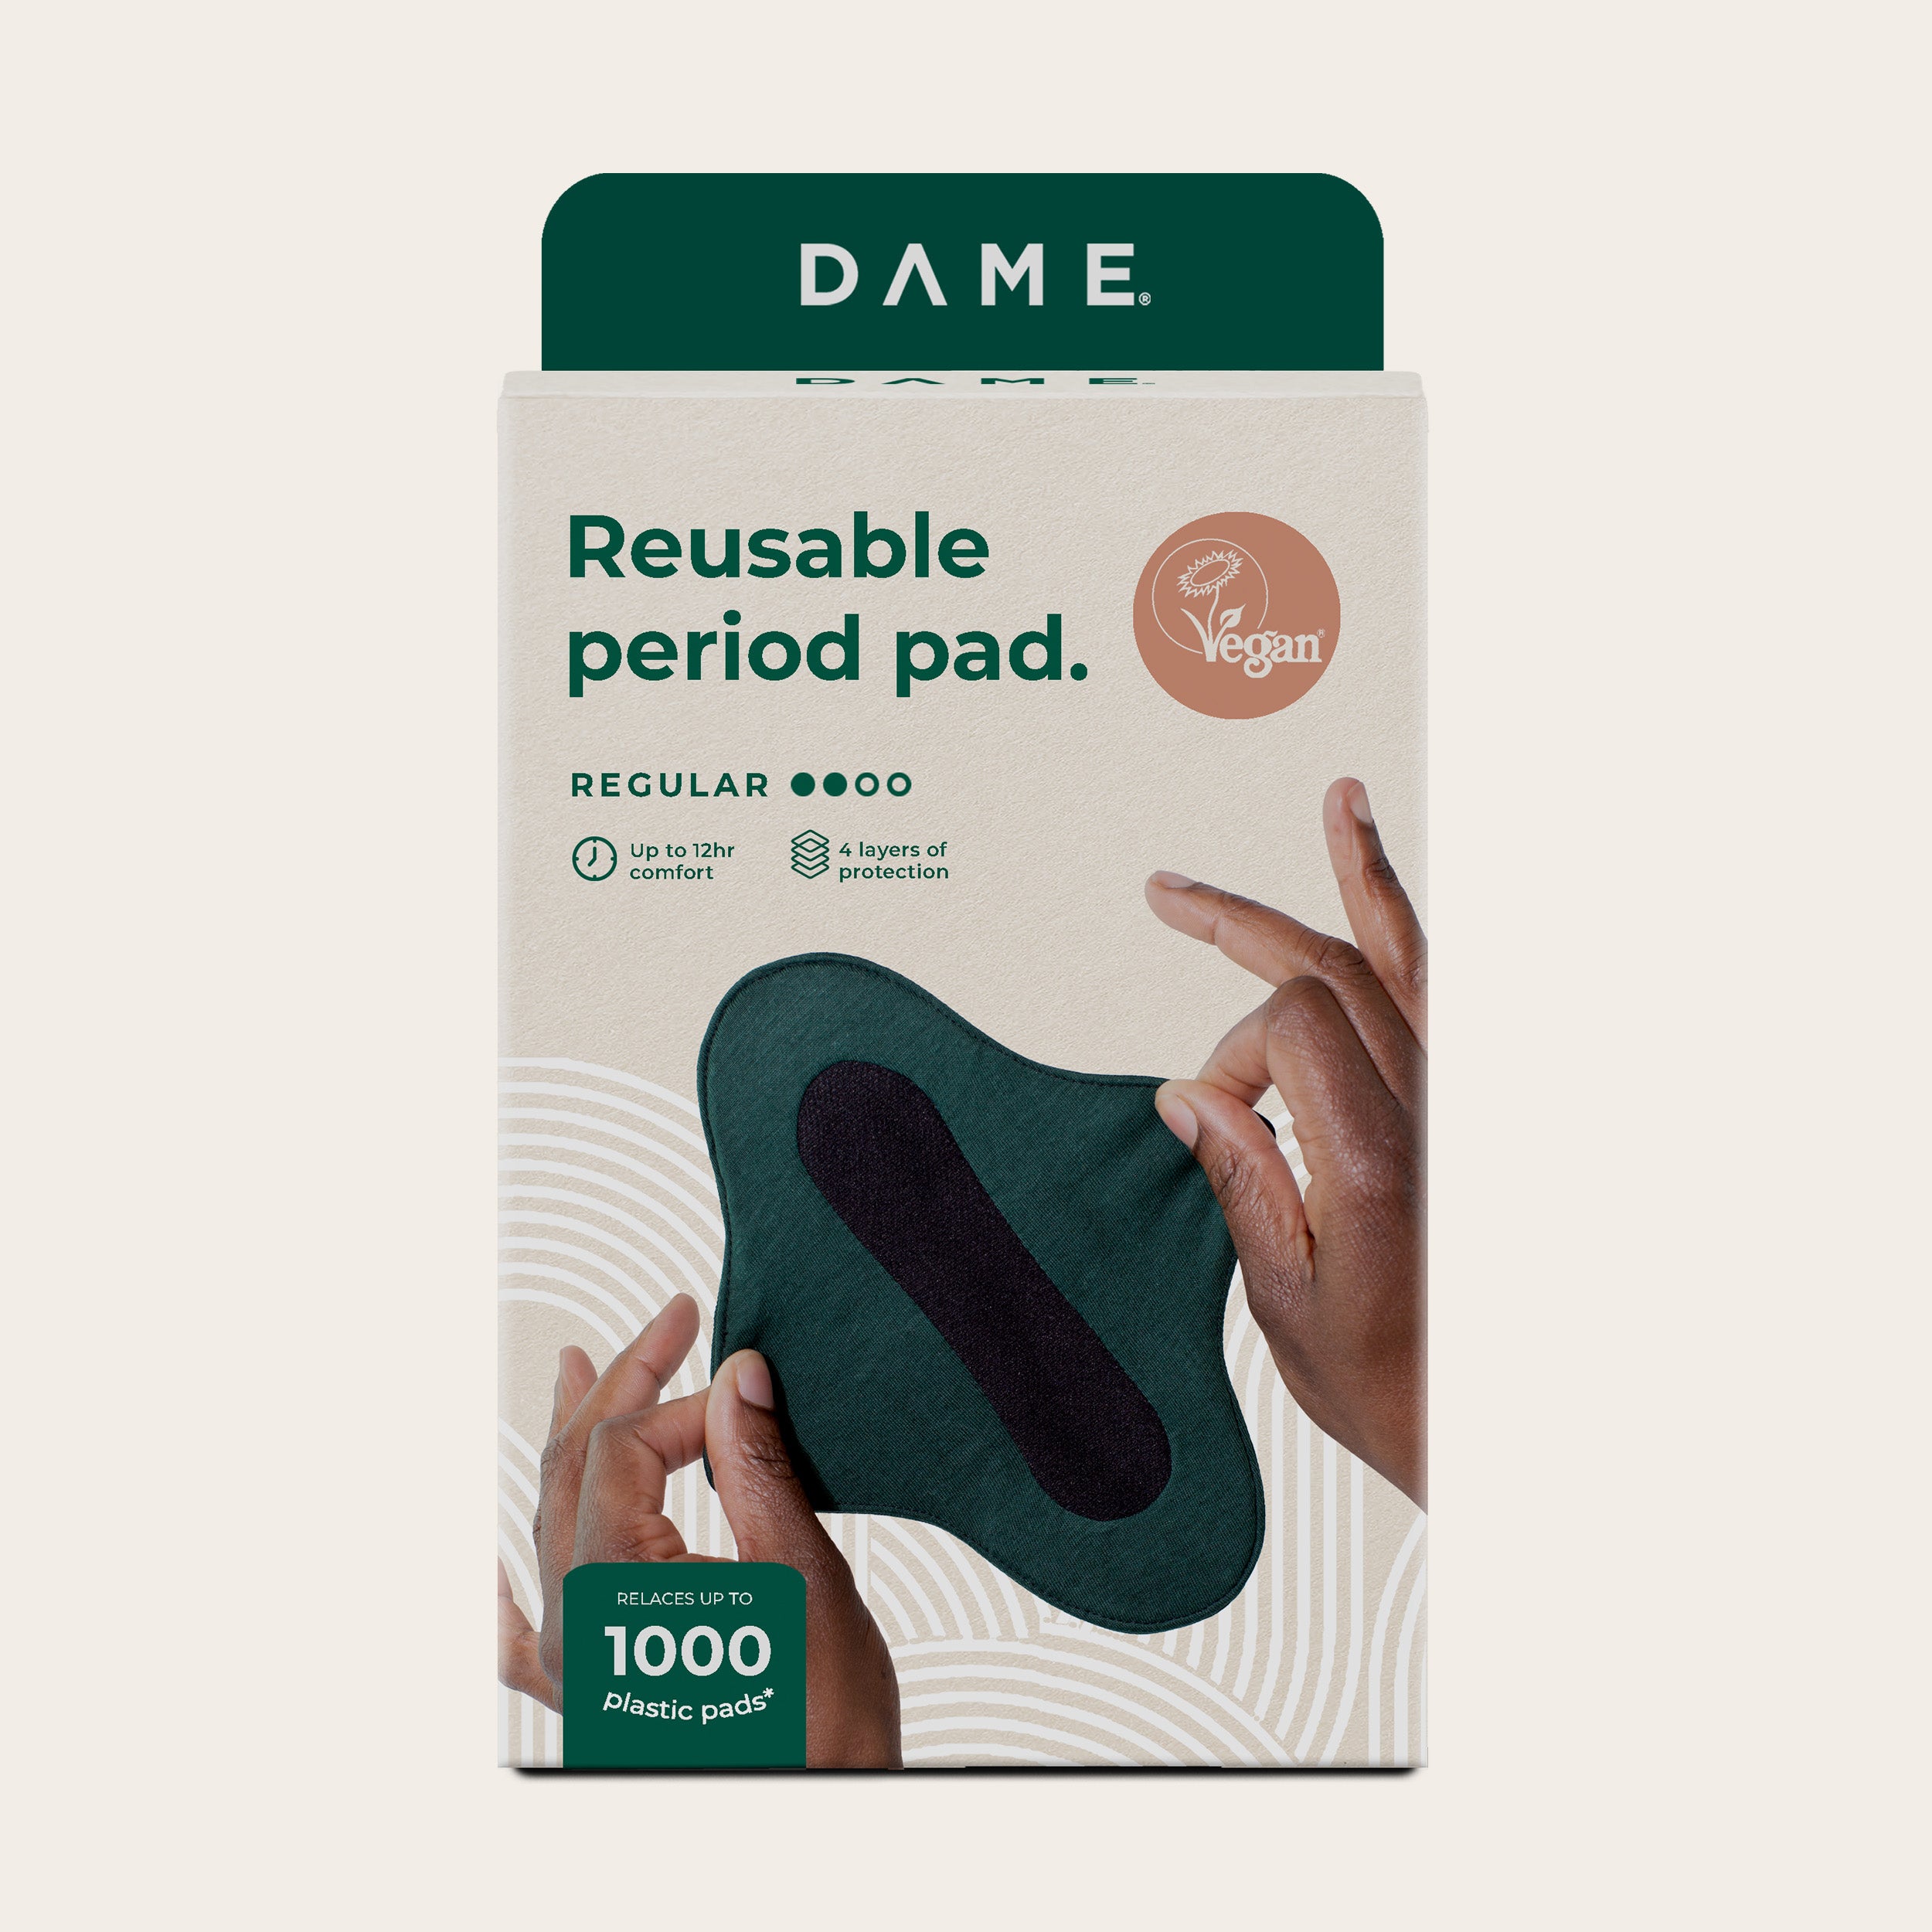 The best reusable period pad - Designed by you. - DAME